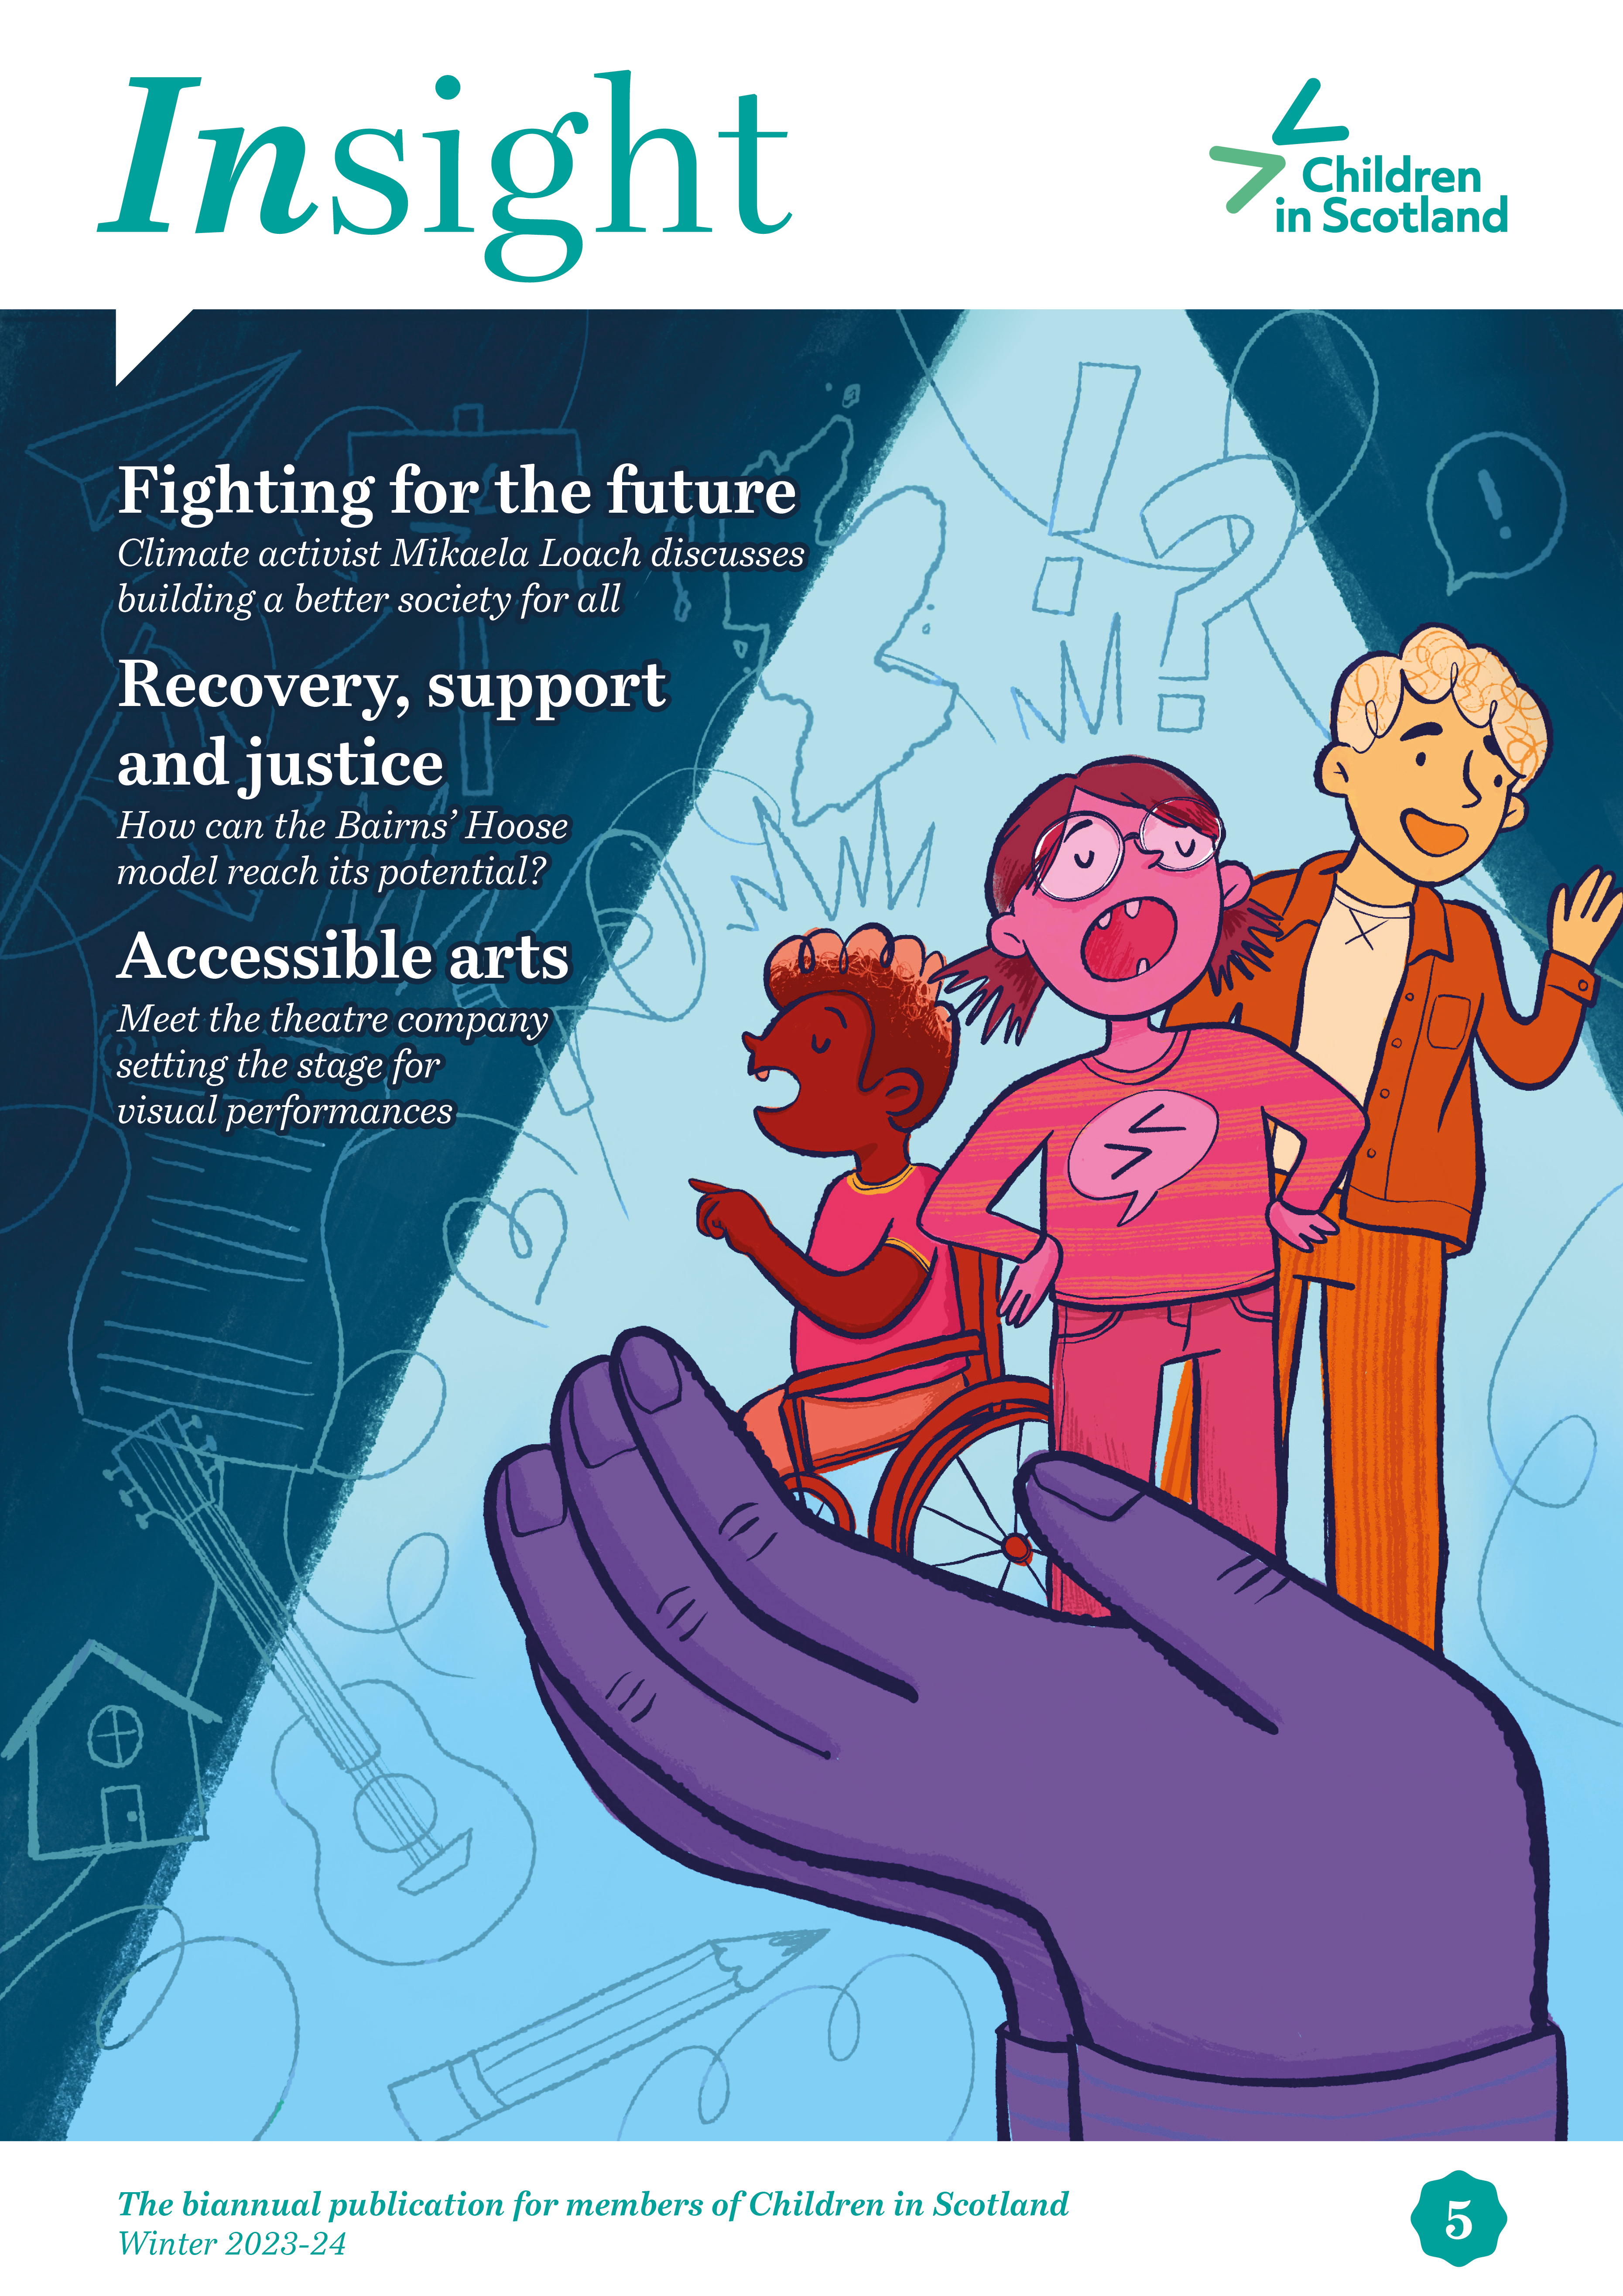 Image shows the cover of issue 5 of Insight, the magazine for members of Children in Scotland. The colourful illustration image depicts three young people held up by a giant hand, while a spotlight shines down from above